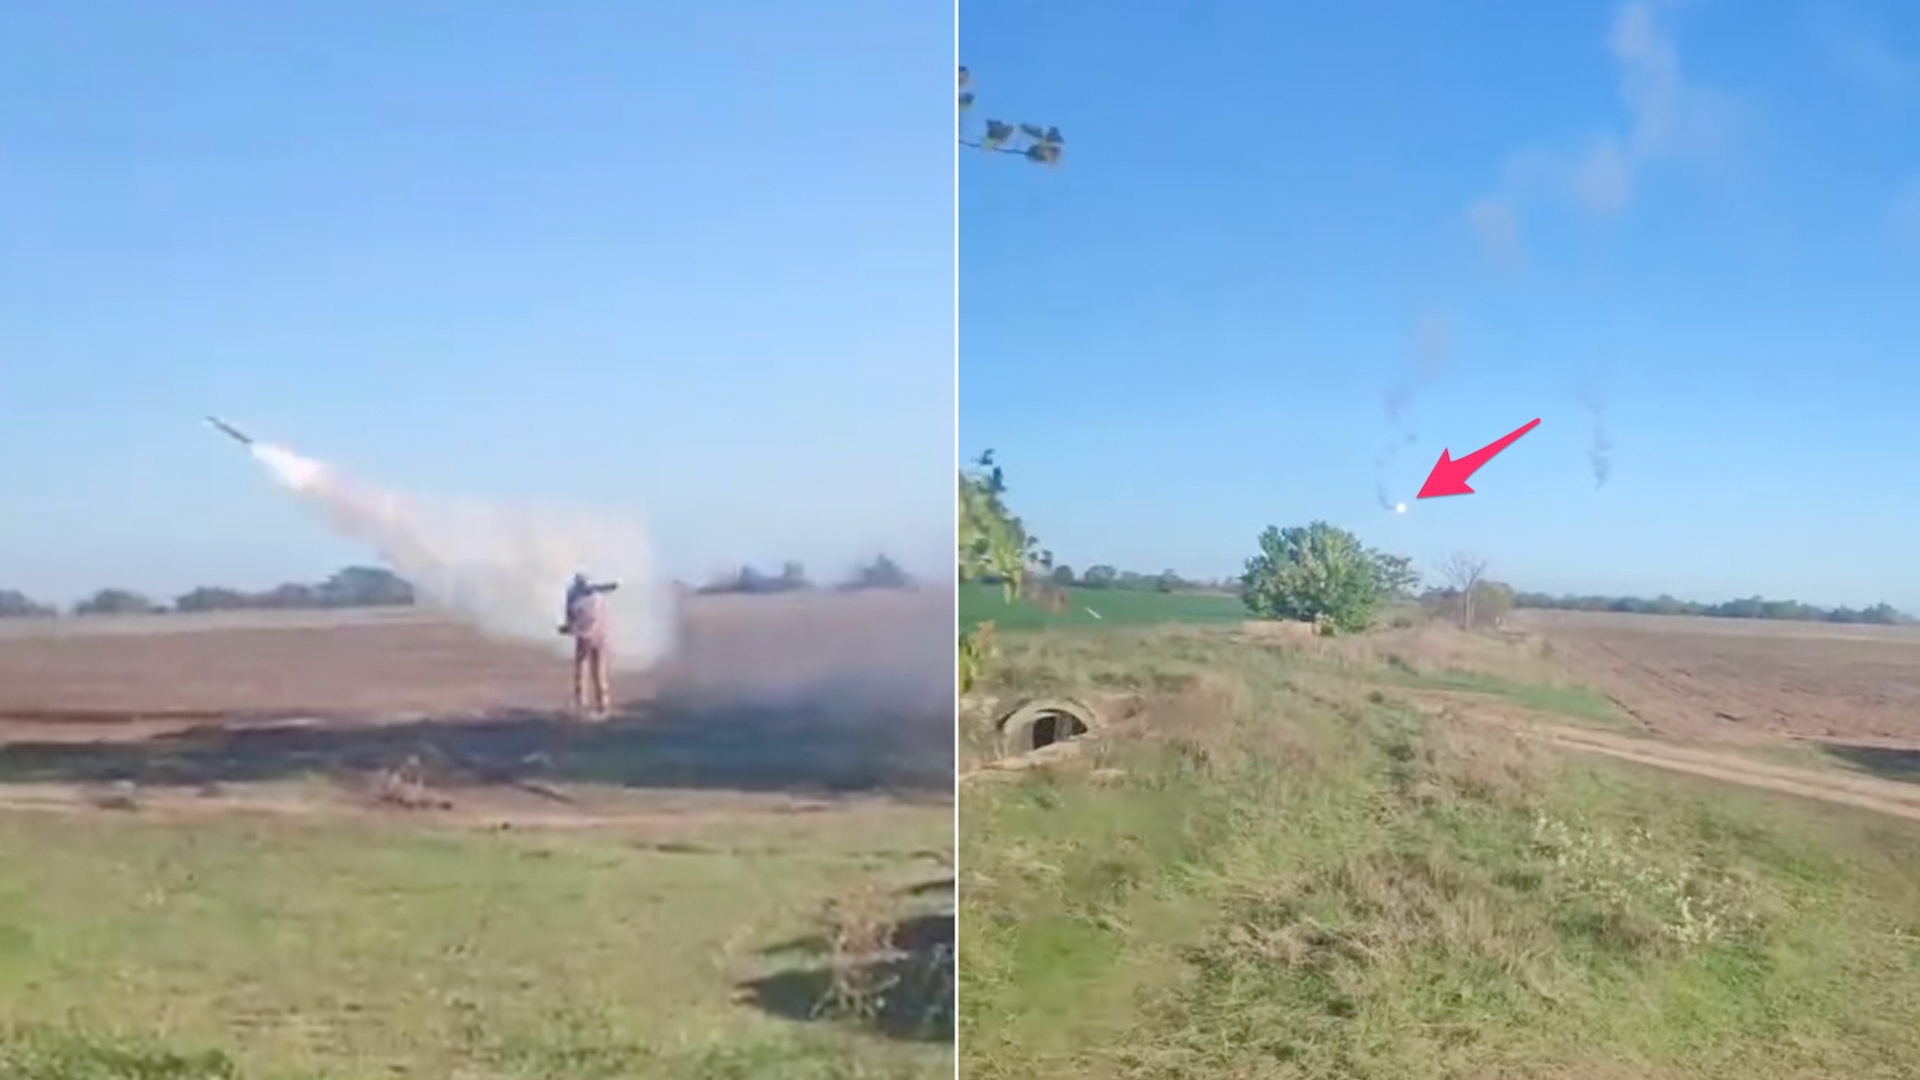 Watch a Ukrainian soldier take out a Russian cruise missile with a MANPADS